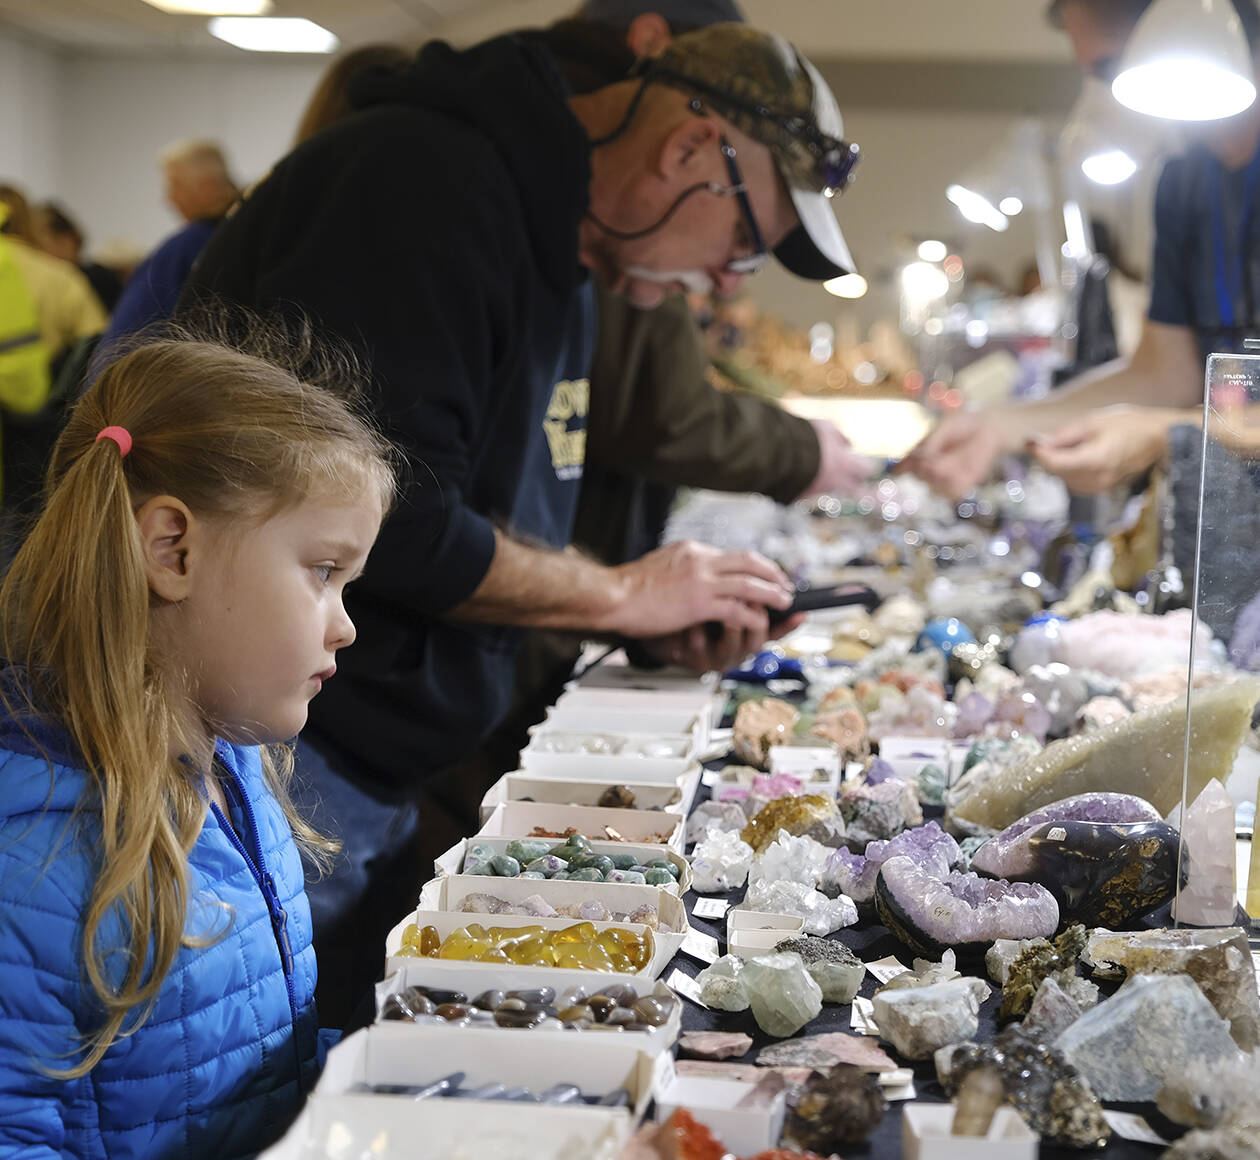 Damon Williams/Kitsap News Group Photos
Fans young and old enjoy looking at rocks at the gem show.